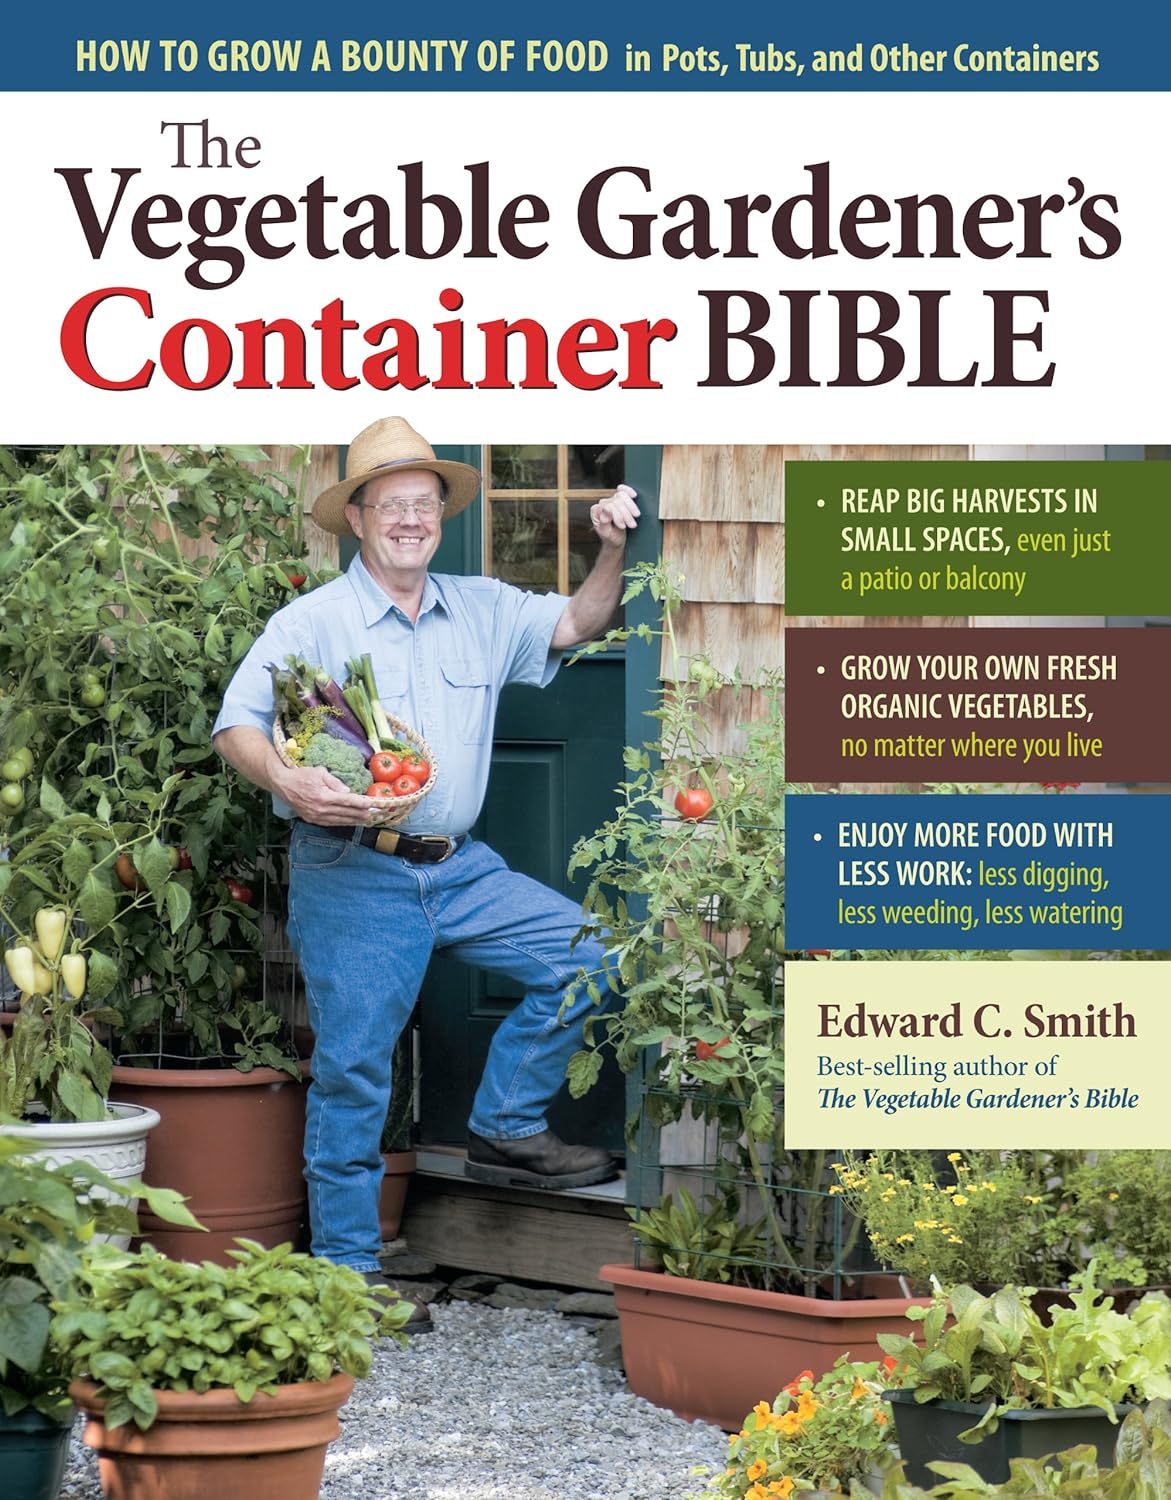 The Secret to Container Vegetable Gardening